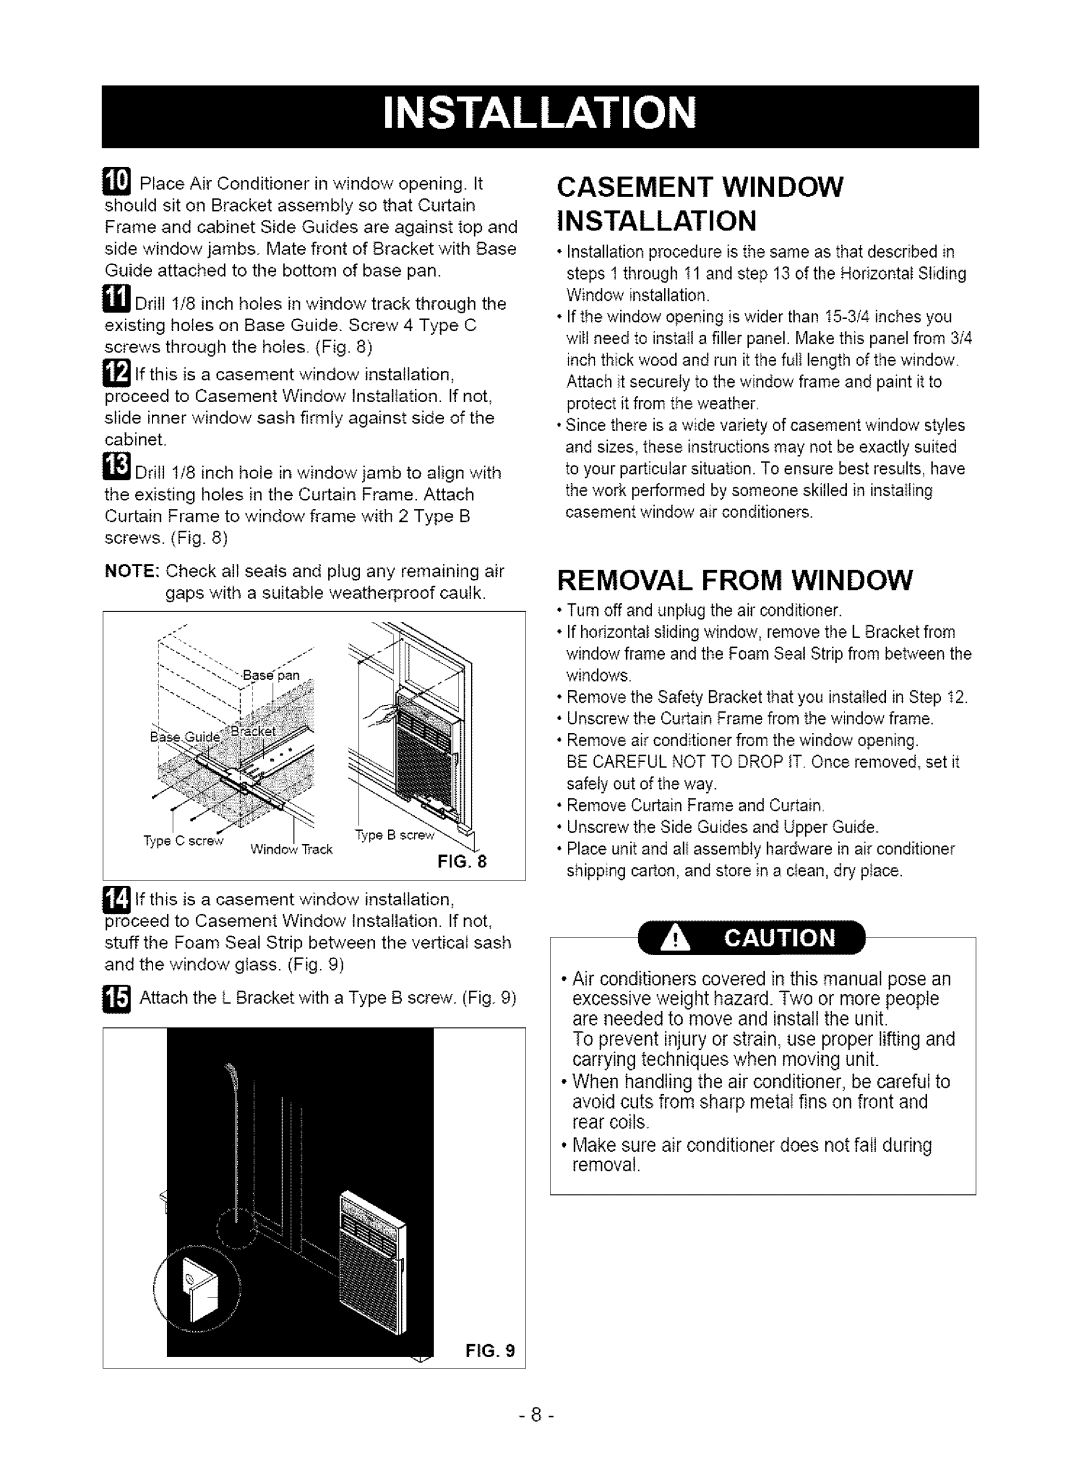 Kenmore 580. 75063, 580.75123 owner manual Casement Window, Installation, Removal From Window 